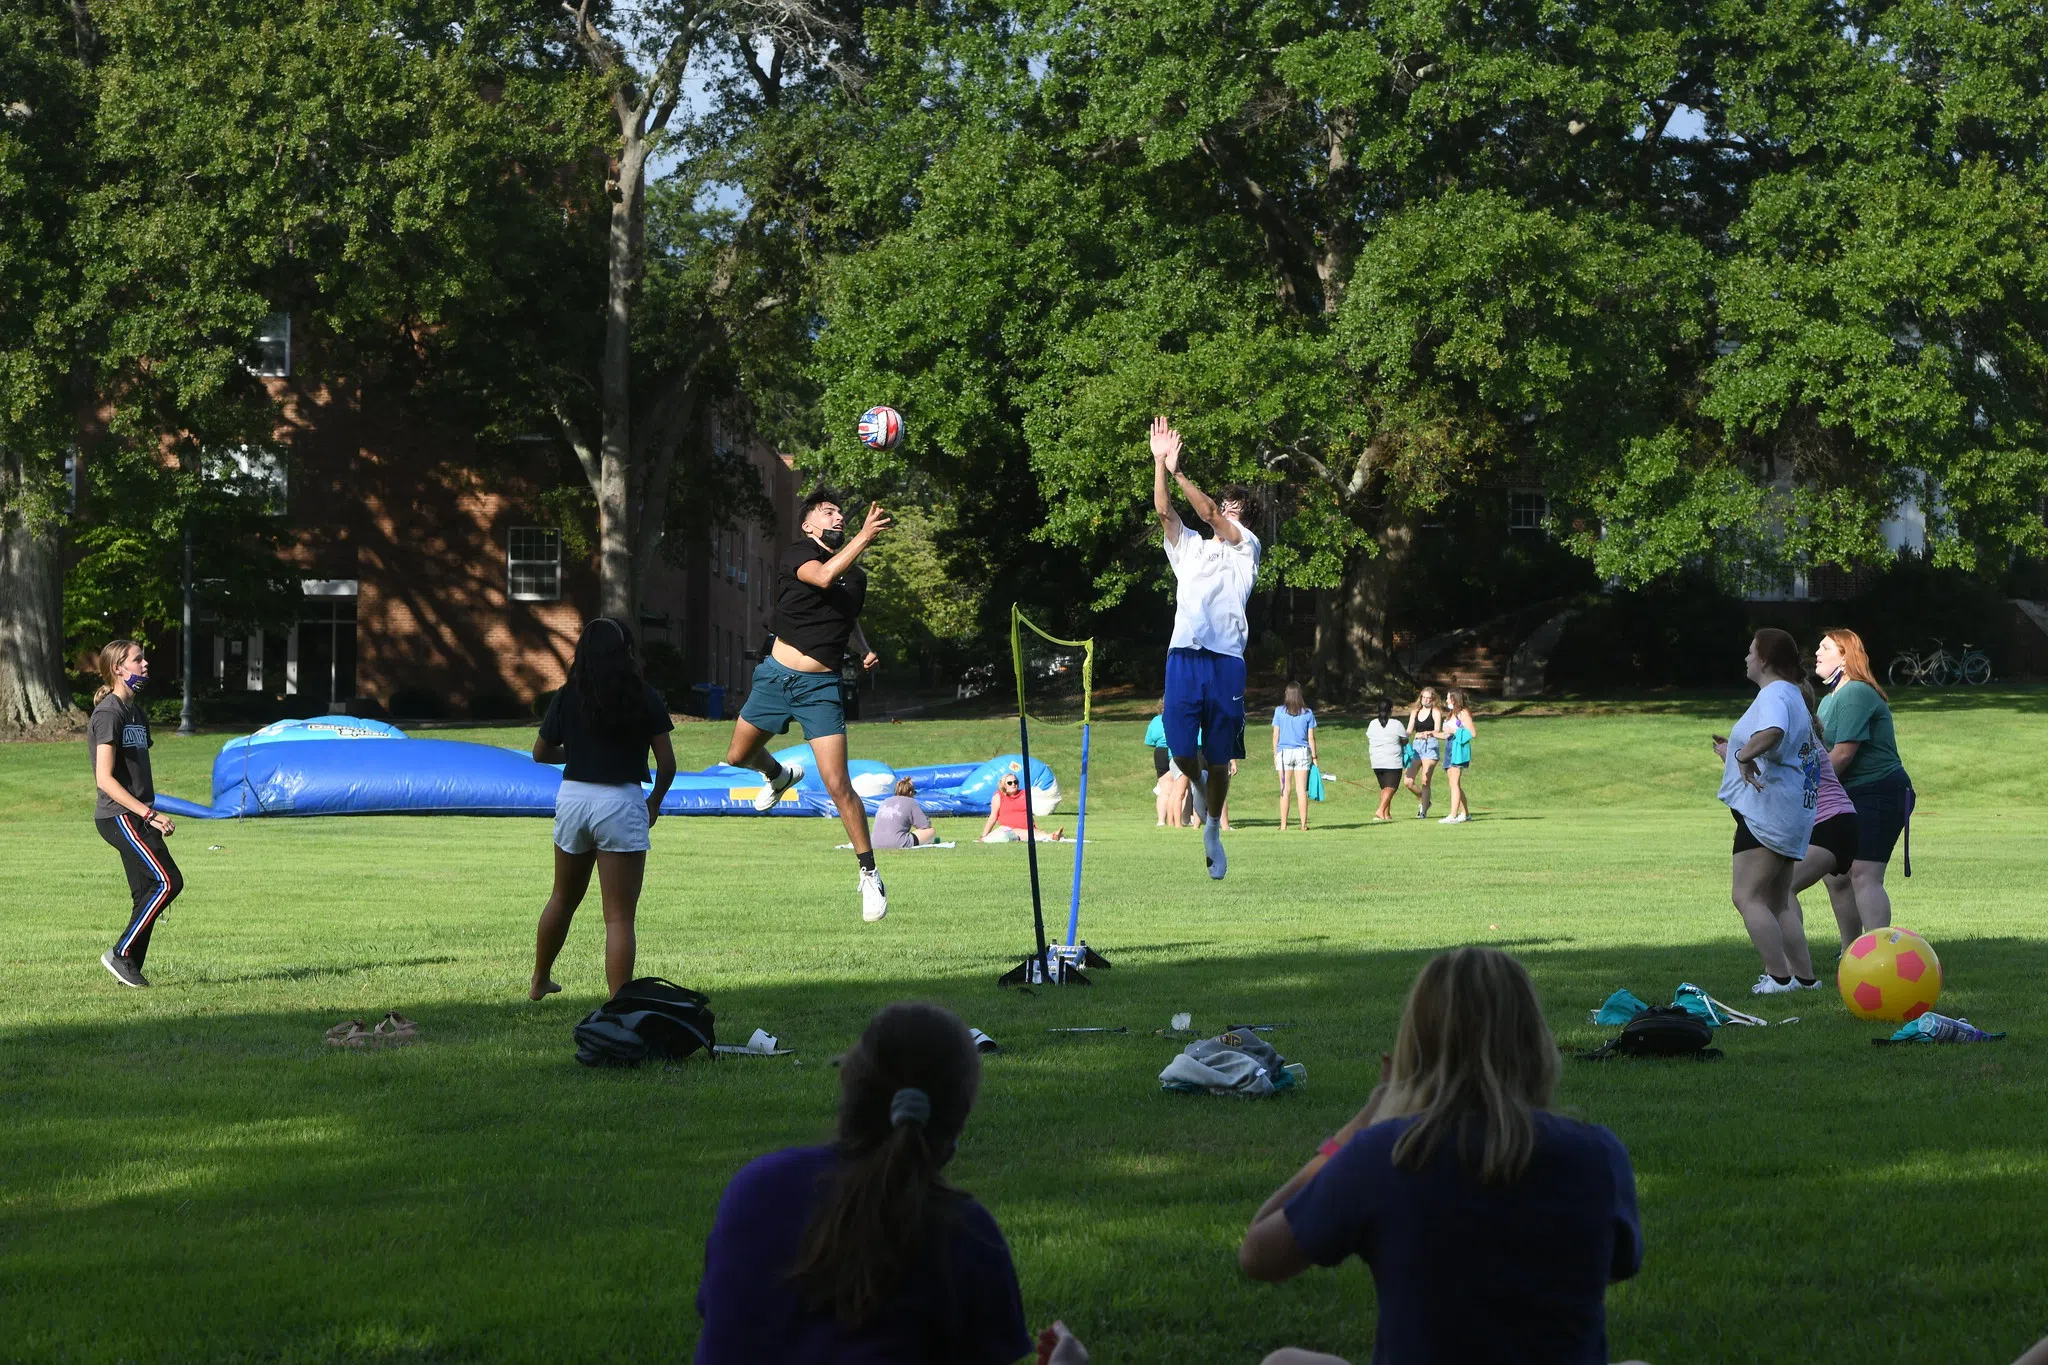 Male and female students play a game of volleyball in a grassy, open field on a sunny day. A large inflatable game is being set up in the background.